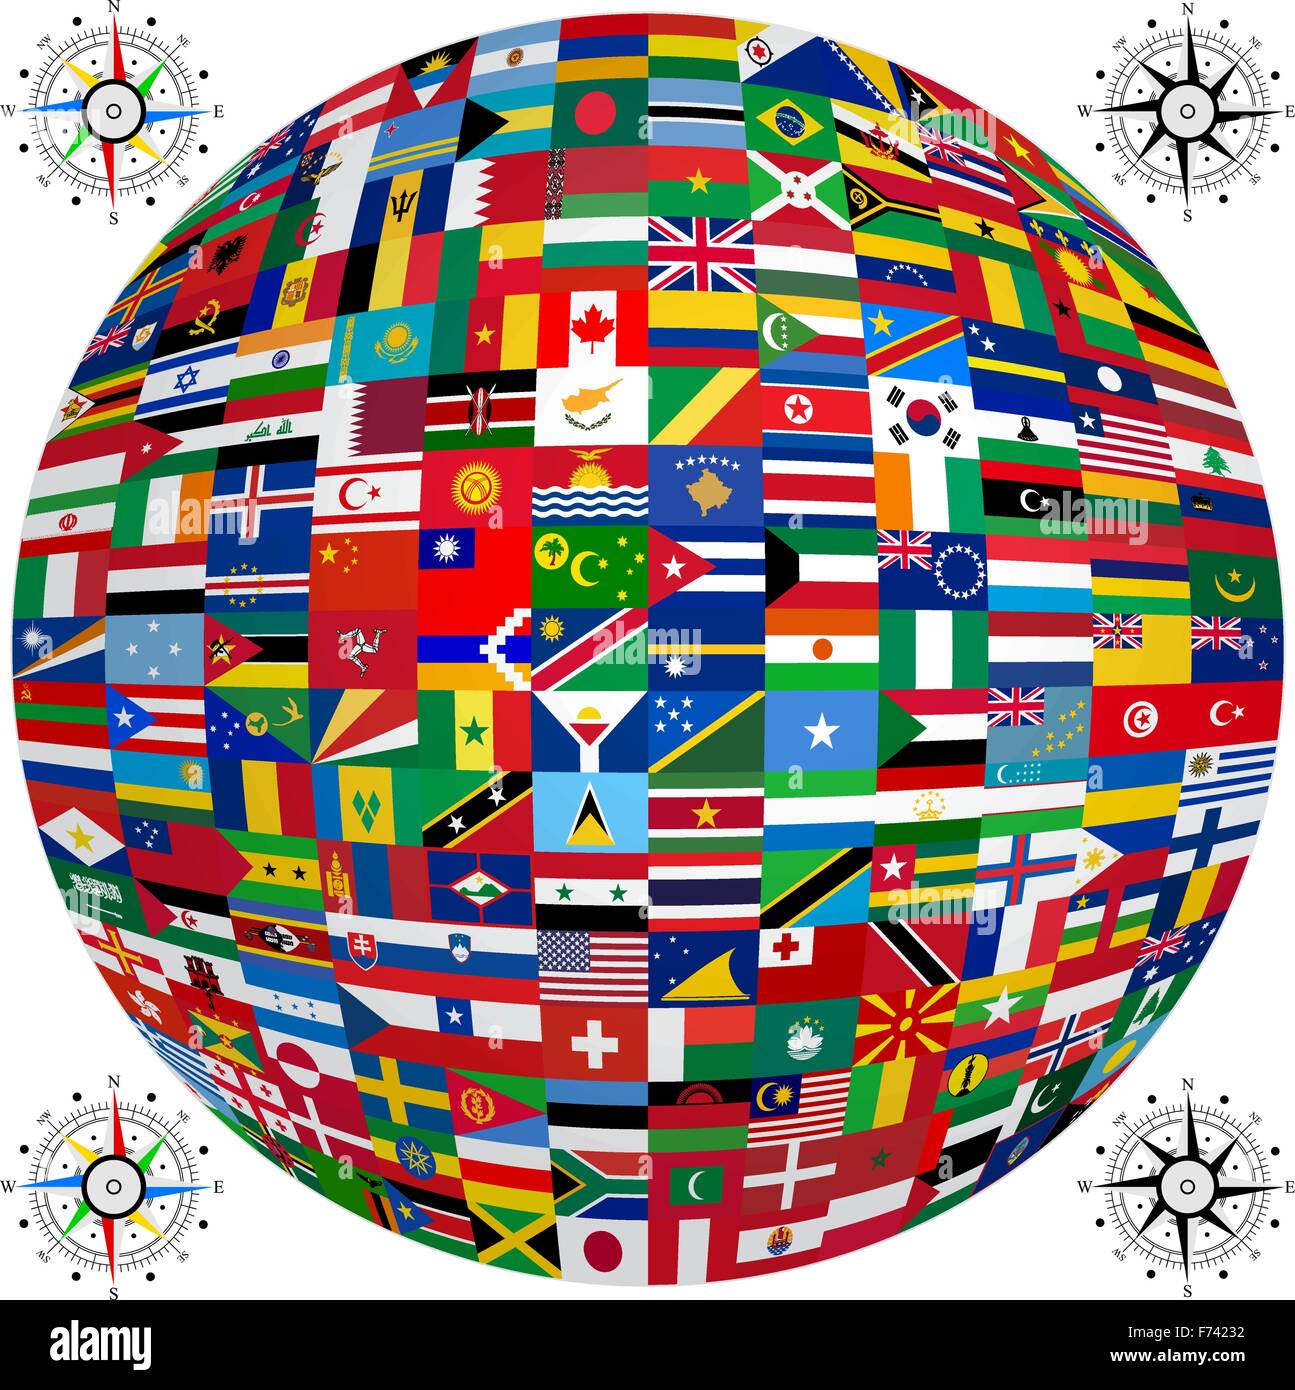 Set Flags of world sovereign states. Vector illustration Stock Vector